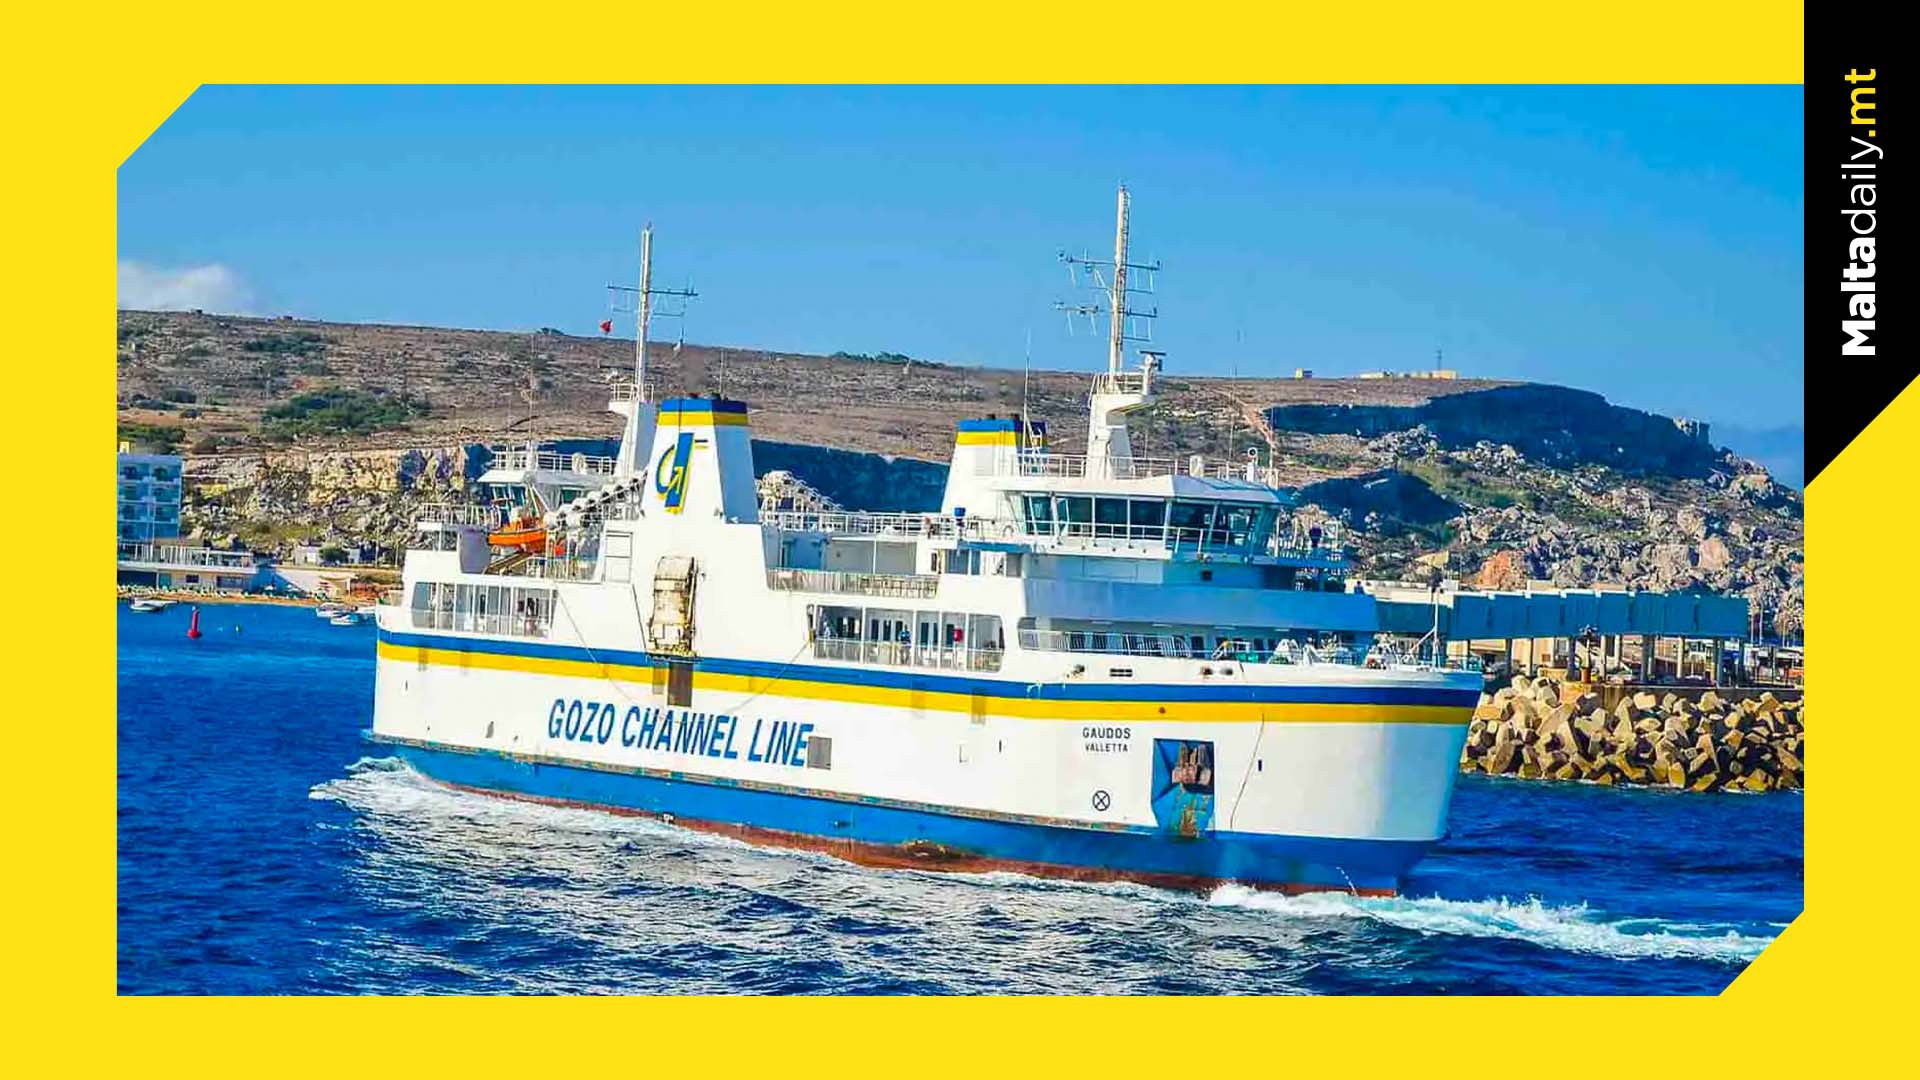 By Sea: more than 1 million travel between Malta and Gozo in Q1